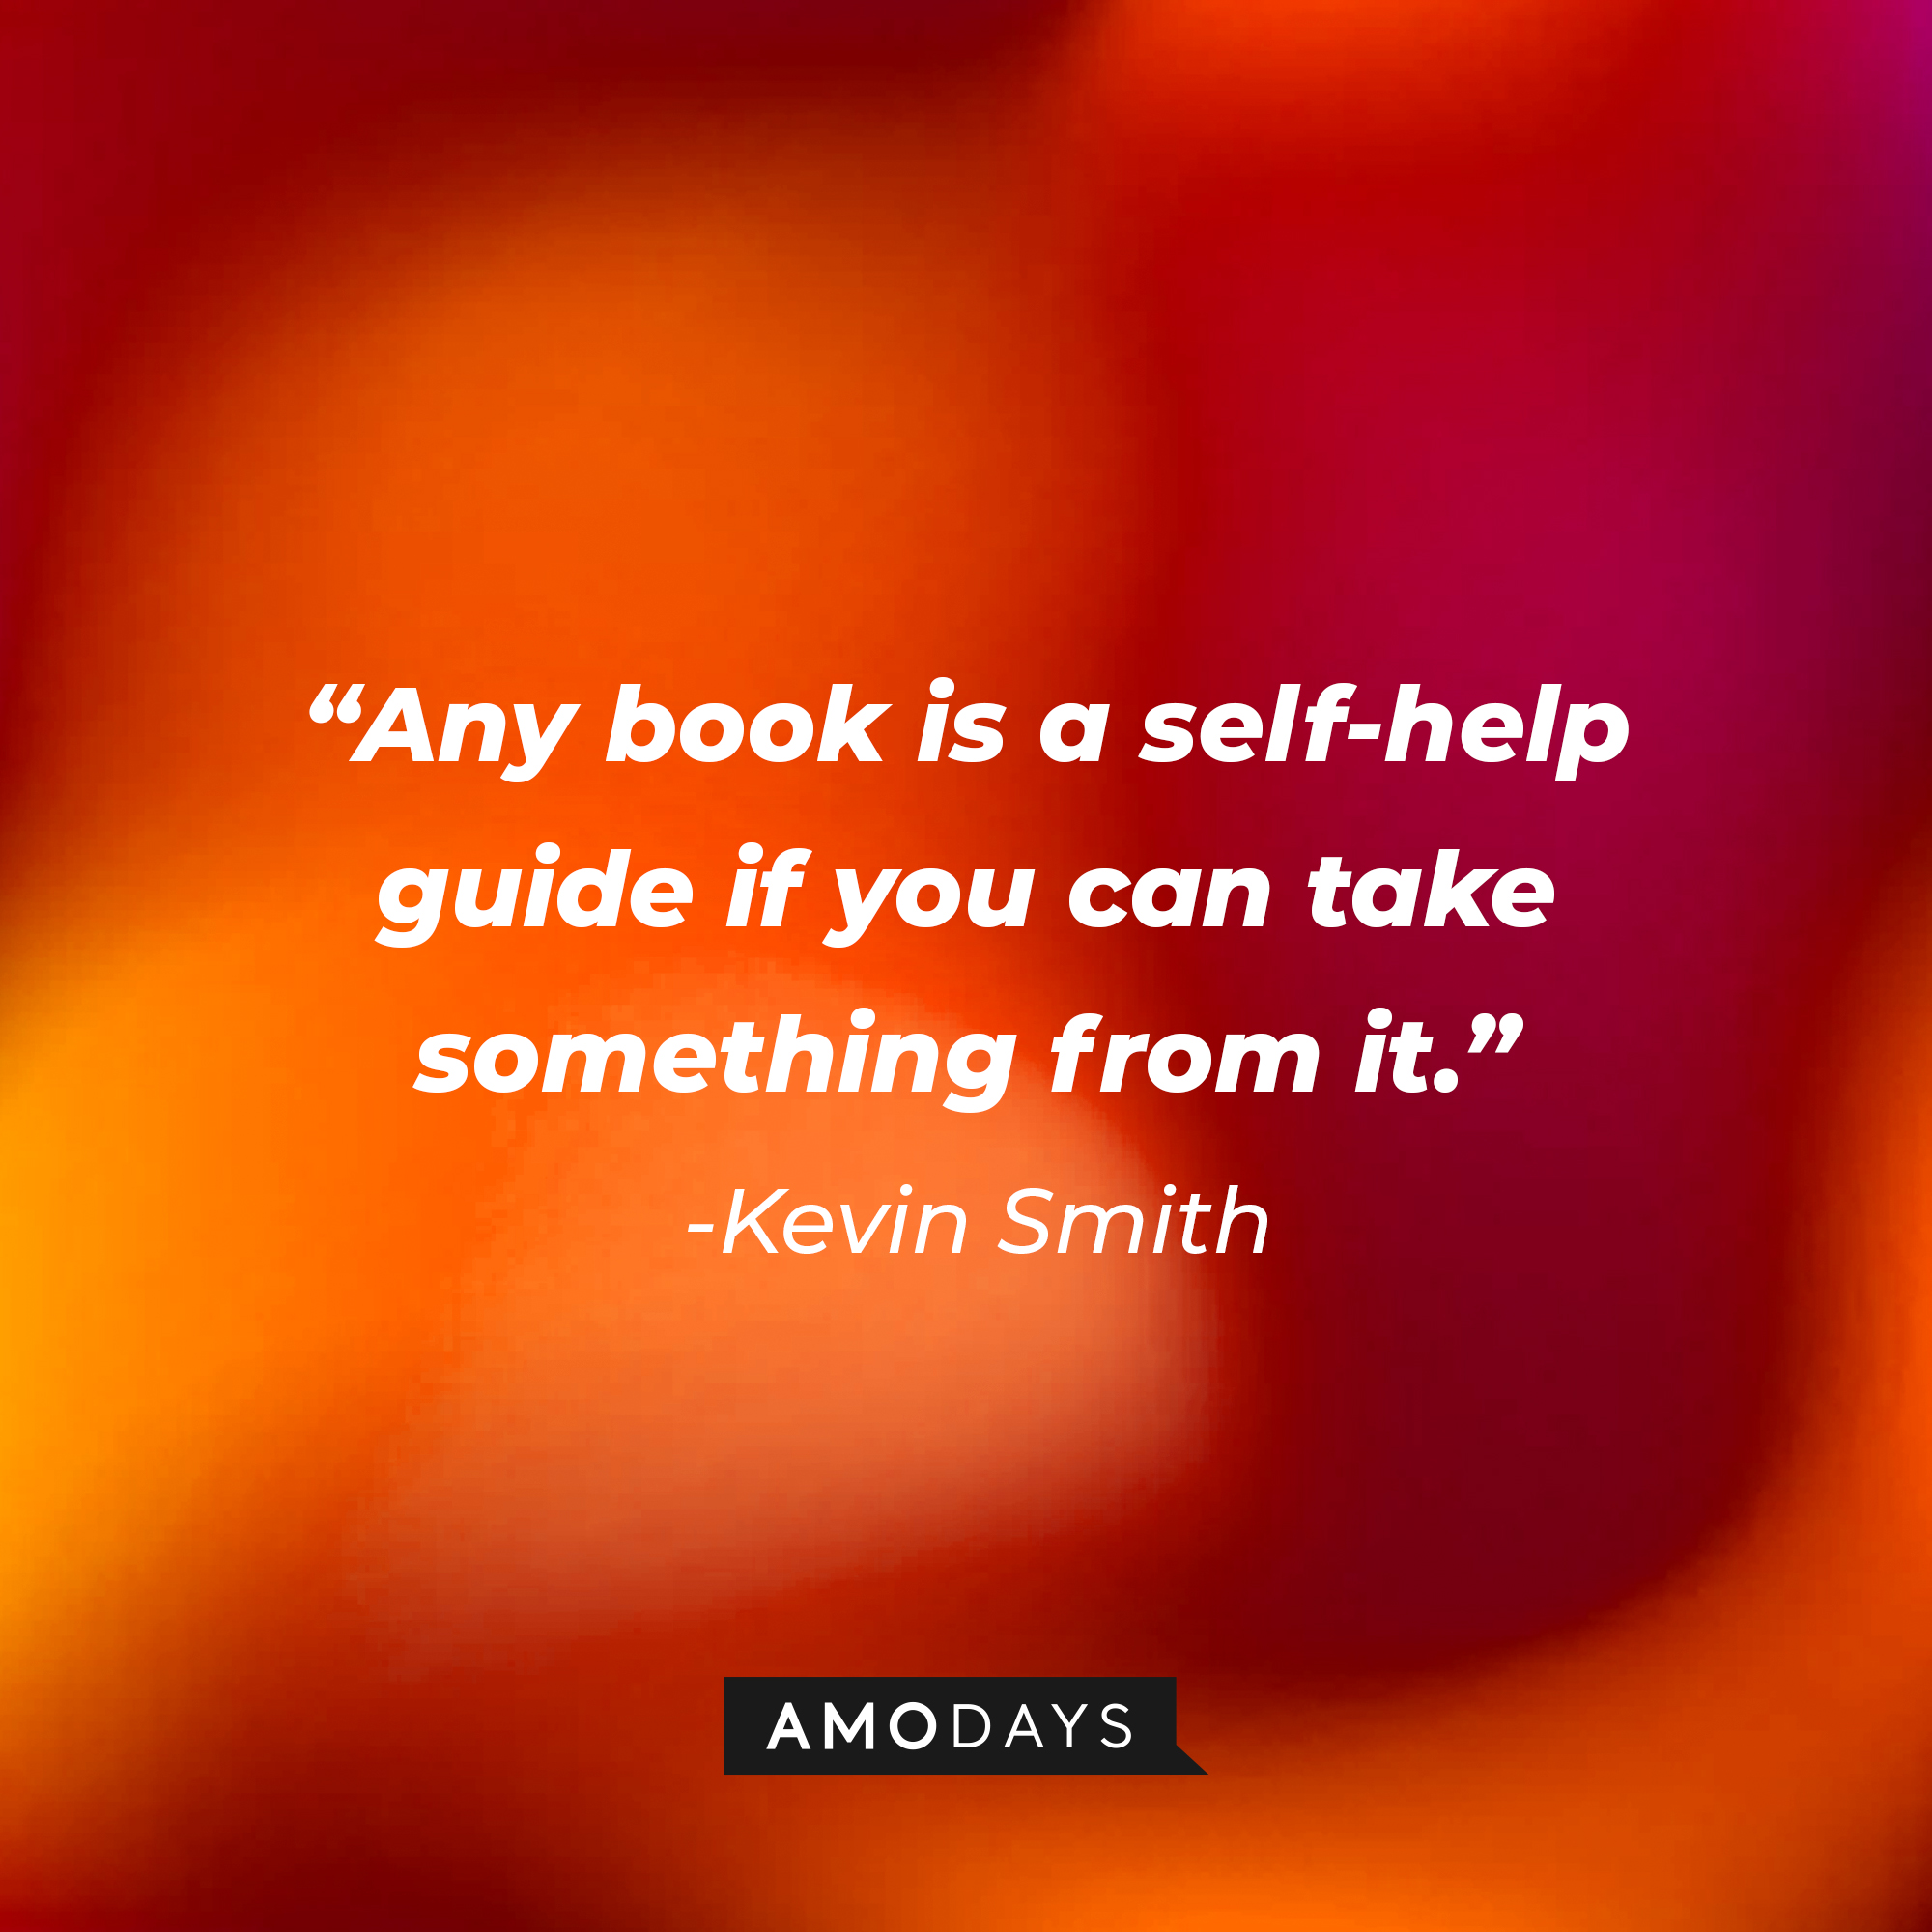 Kevin Smith’s quote: “Any book is a self-help guide if you can take something from it.” | Source: AmoDays